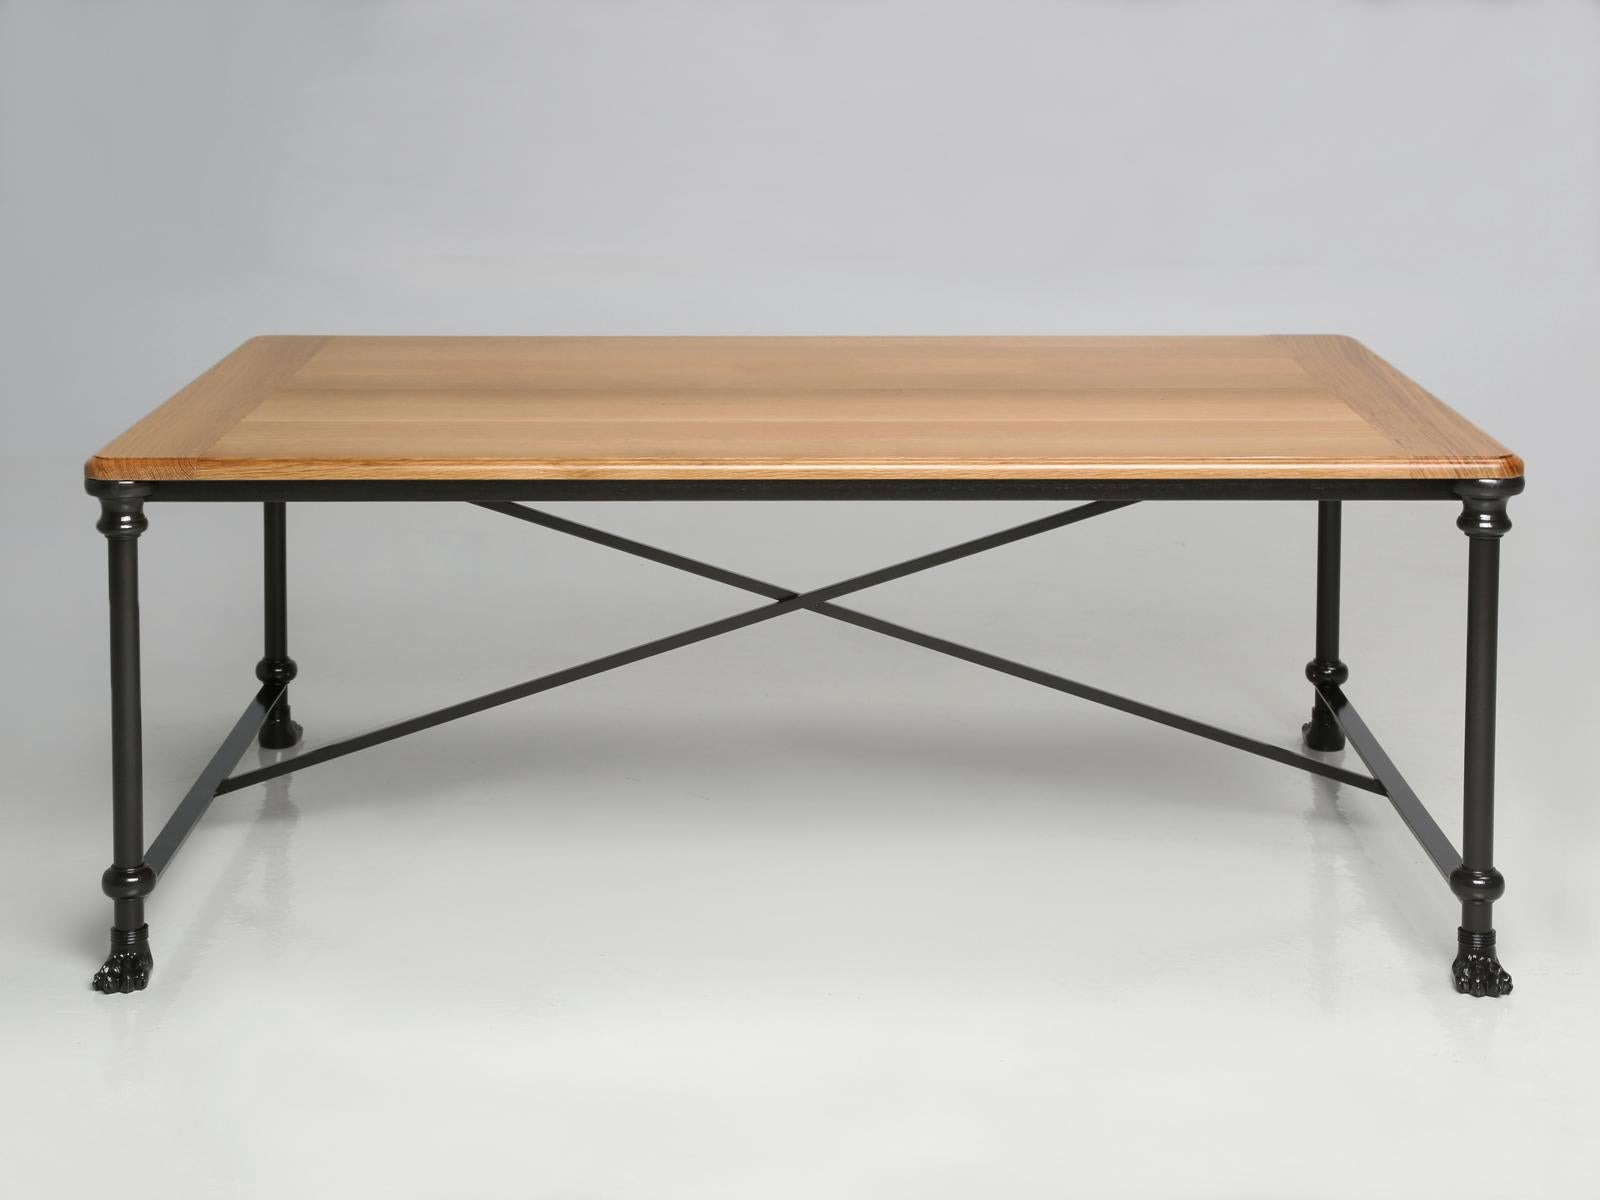 French Industrial inspired coffee table or cocktail table built inhouse by our Old Plank craftsmen to your exactly specifications. The origins of this style date back to the French old draper’s tables that were common around the early 1900’s. We